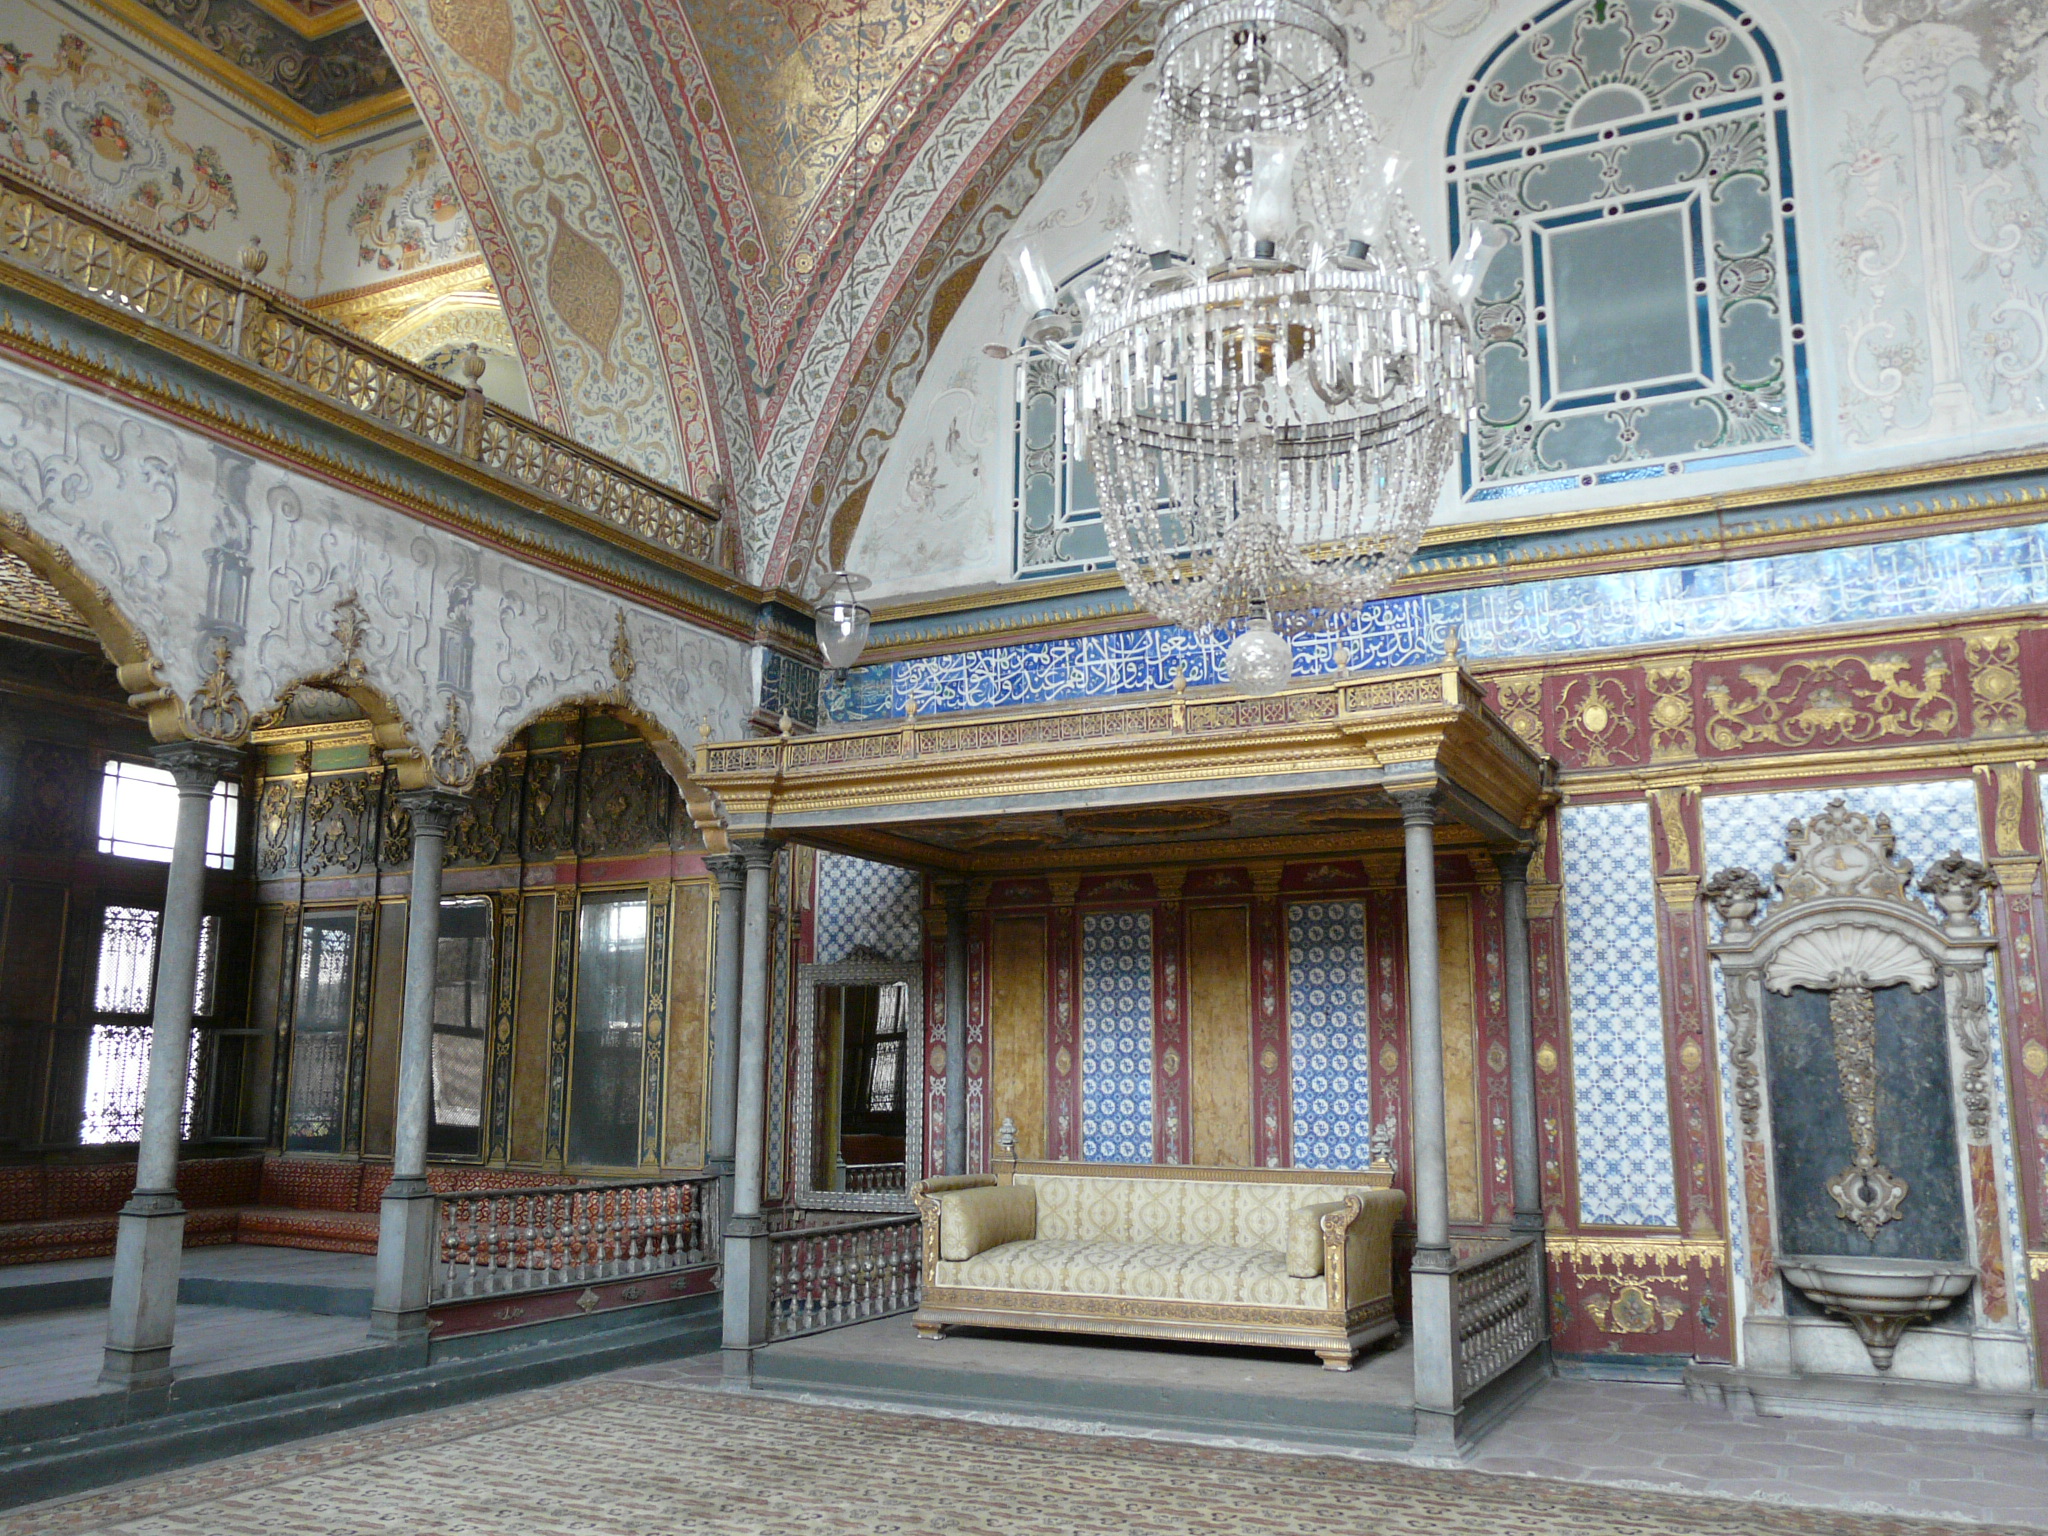  - 09Aug13_Istanbul_96_Tour_Topkapi_Palace_Harem_sultan_s_private_apartments_Imperial_Hall_throne